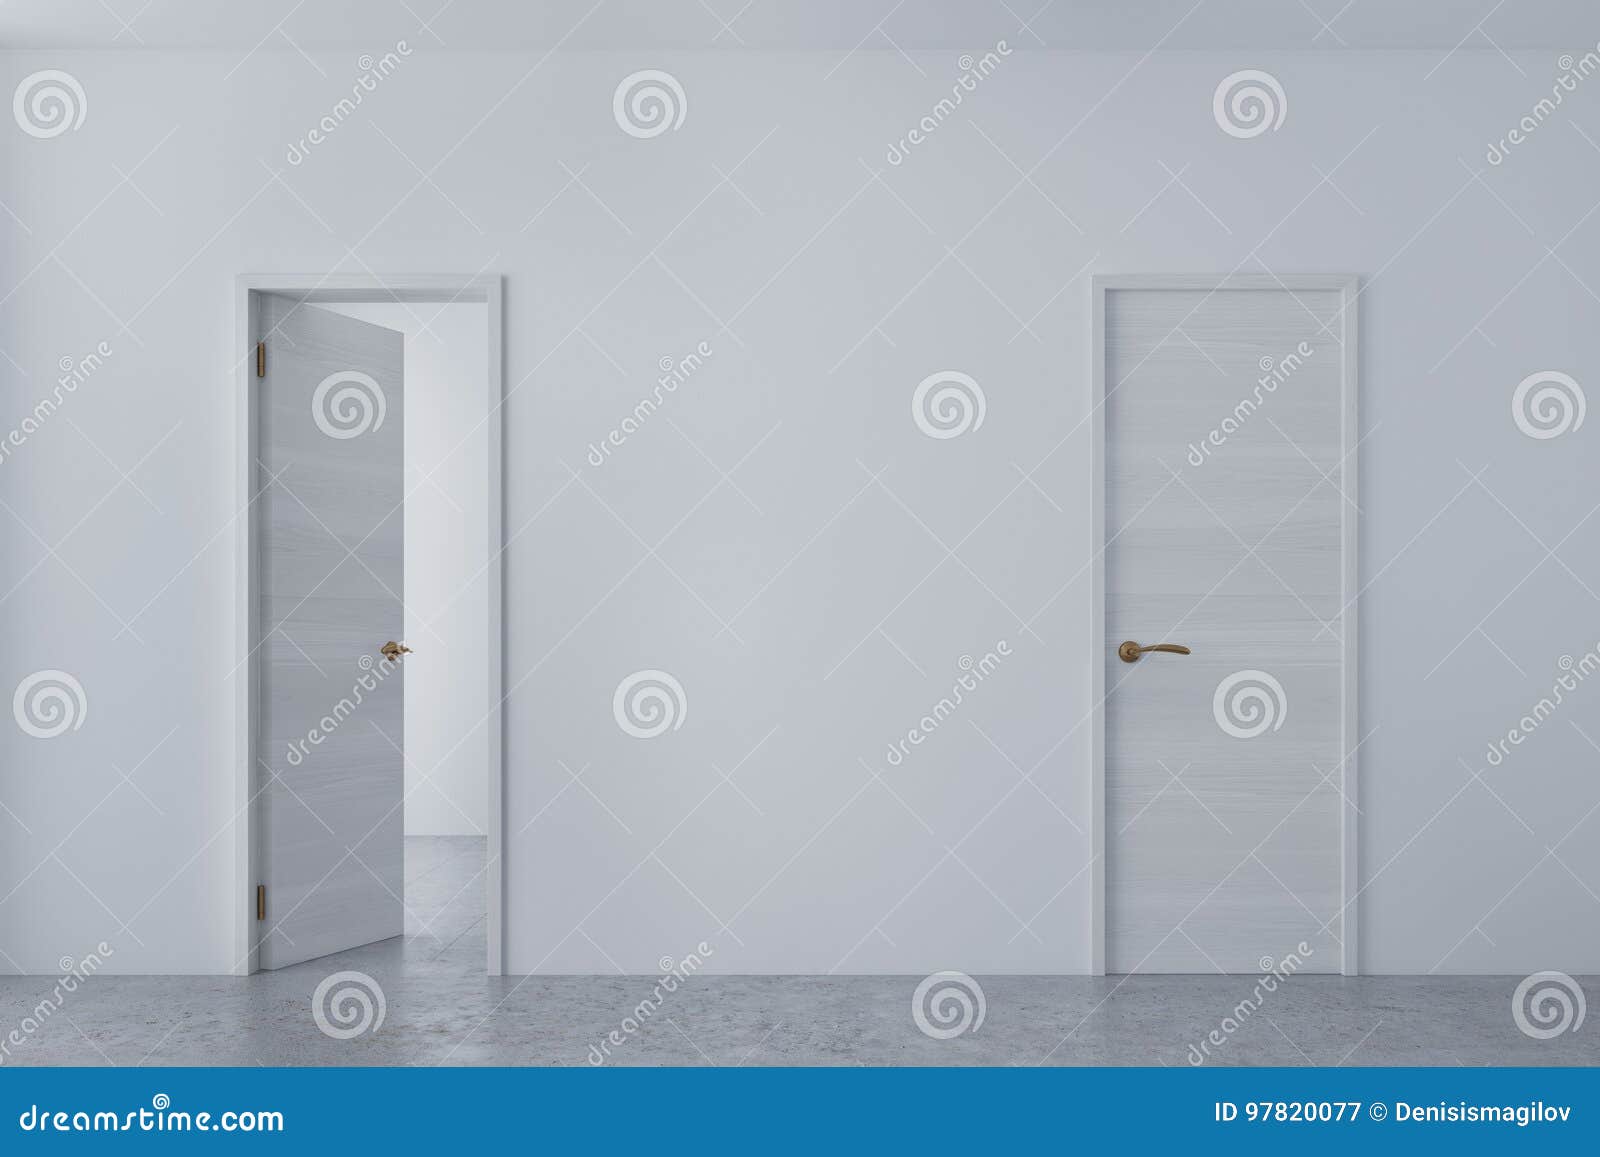 White Room With Empty And Closed Doors Stock Illustration